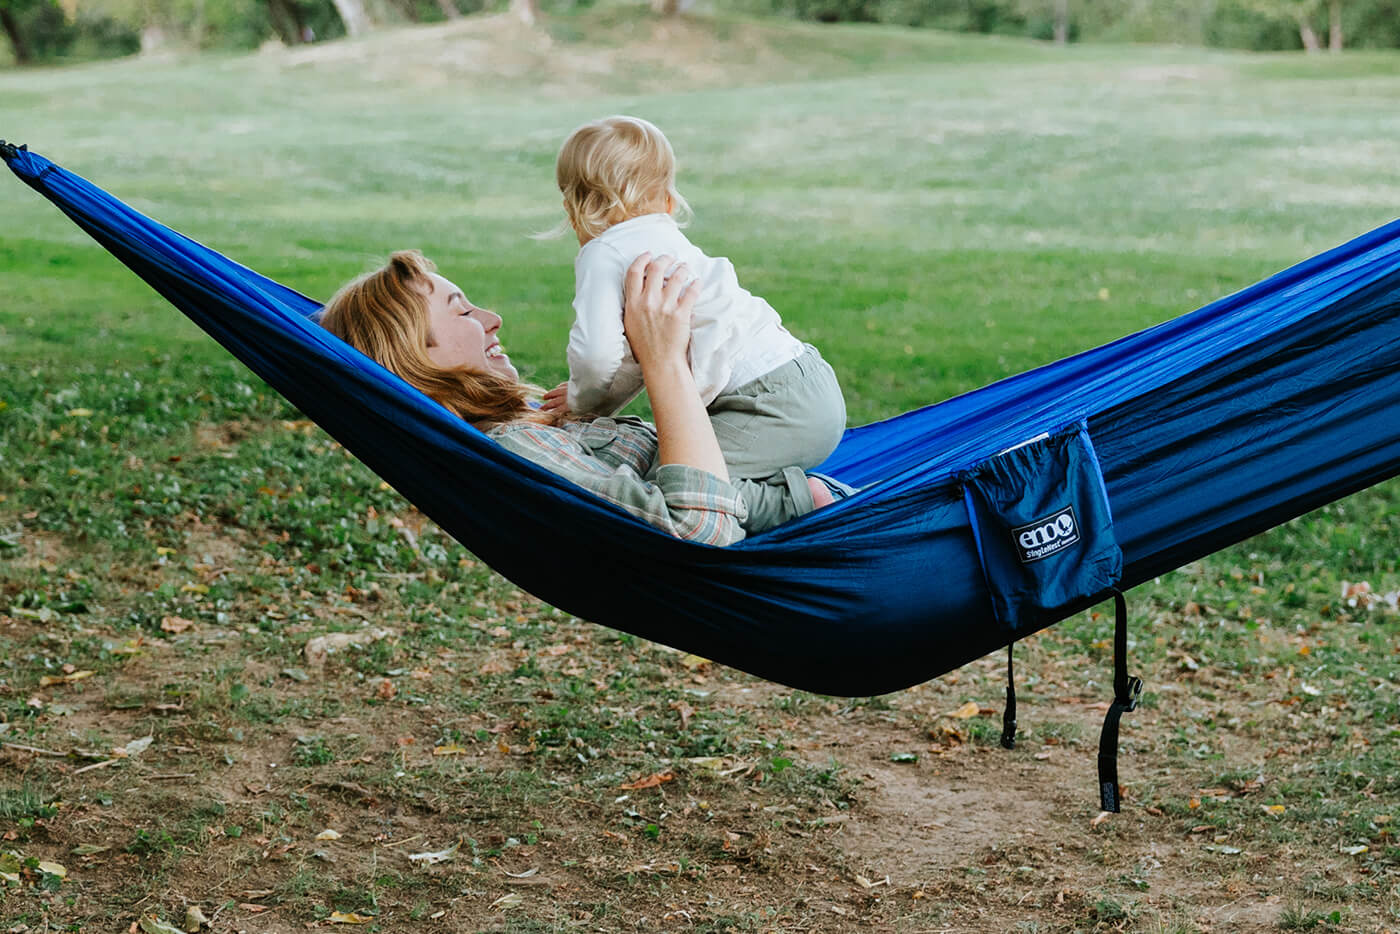 5 Reasons Why ENO Hammocks are the Perfect Gift for Mother’s Day